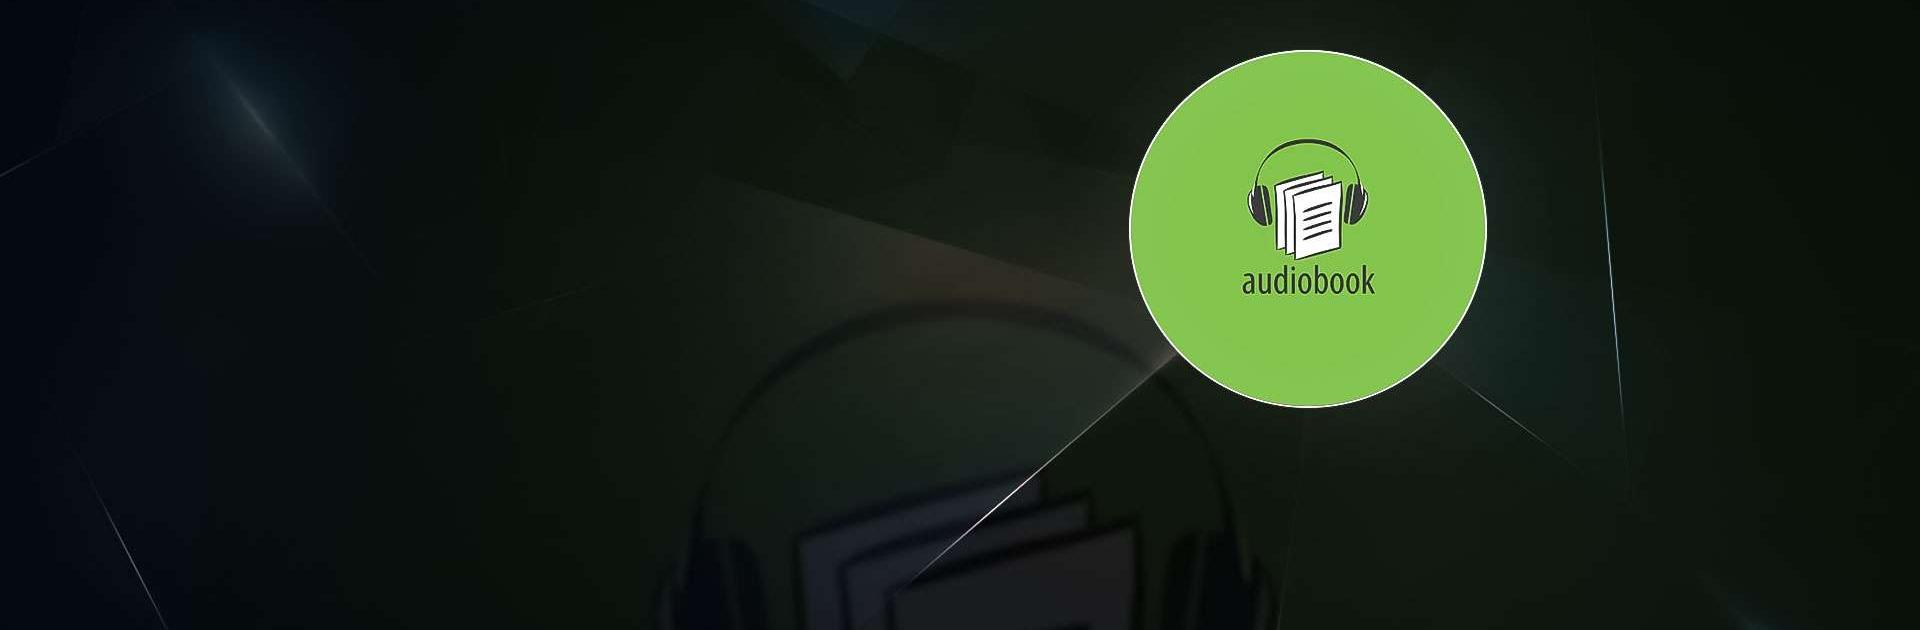 Learn English by Audio Stories